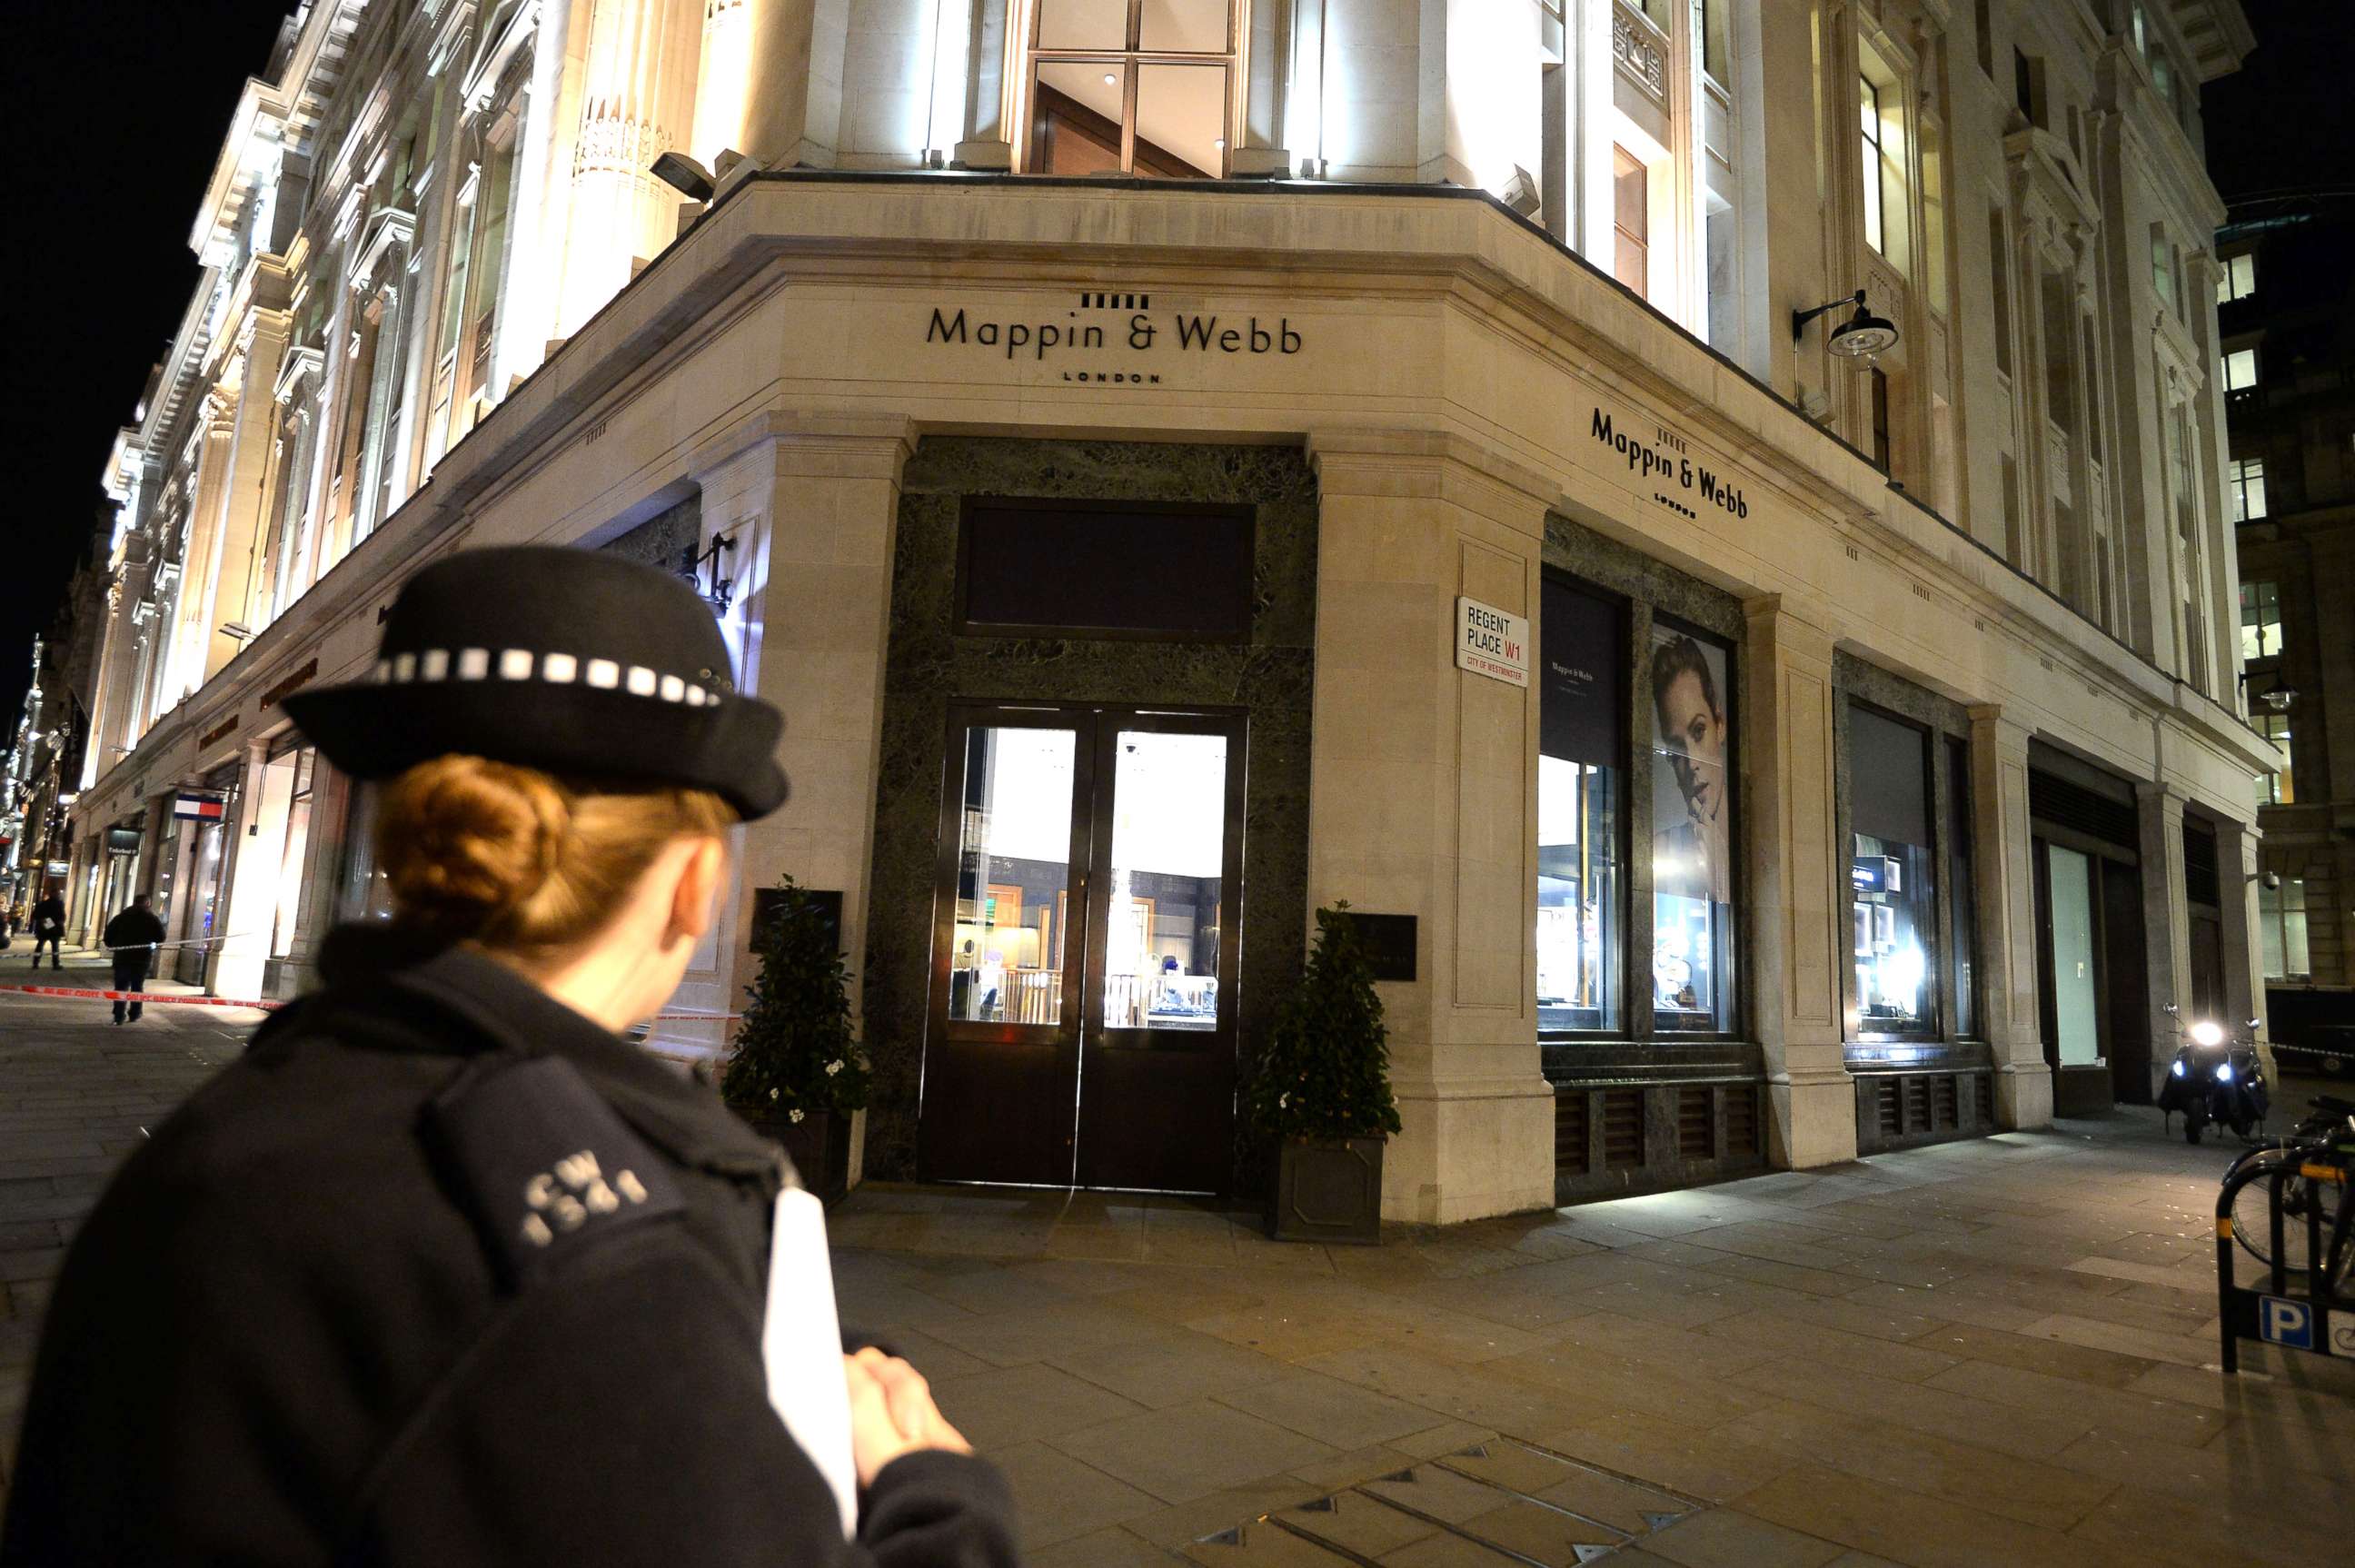 PHOTO: Damage shown in the Mappin and Webb jewelry store on Regent's Street, following a smash and grab raid, in central London, Oct. 9, 2017.